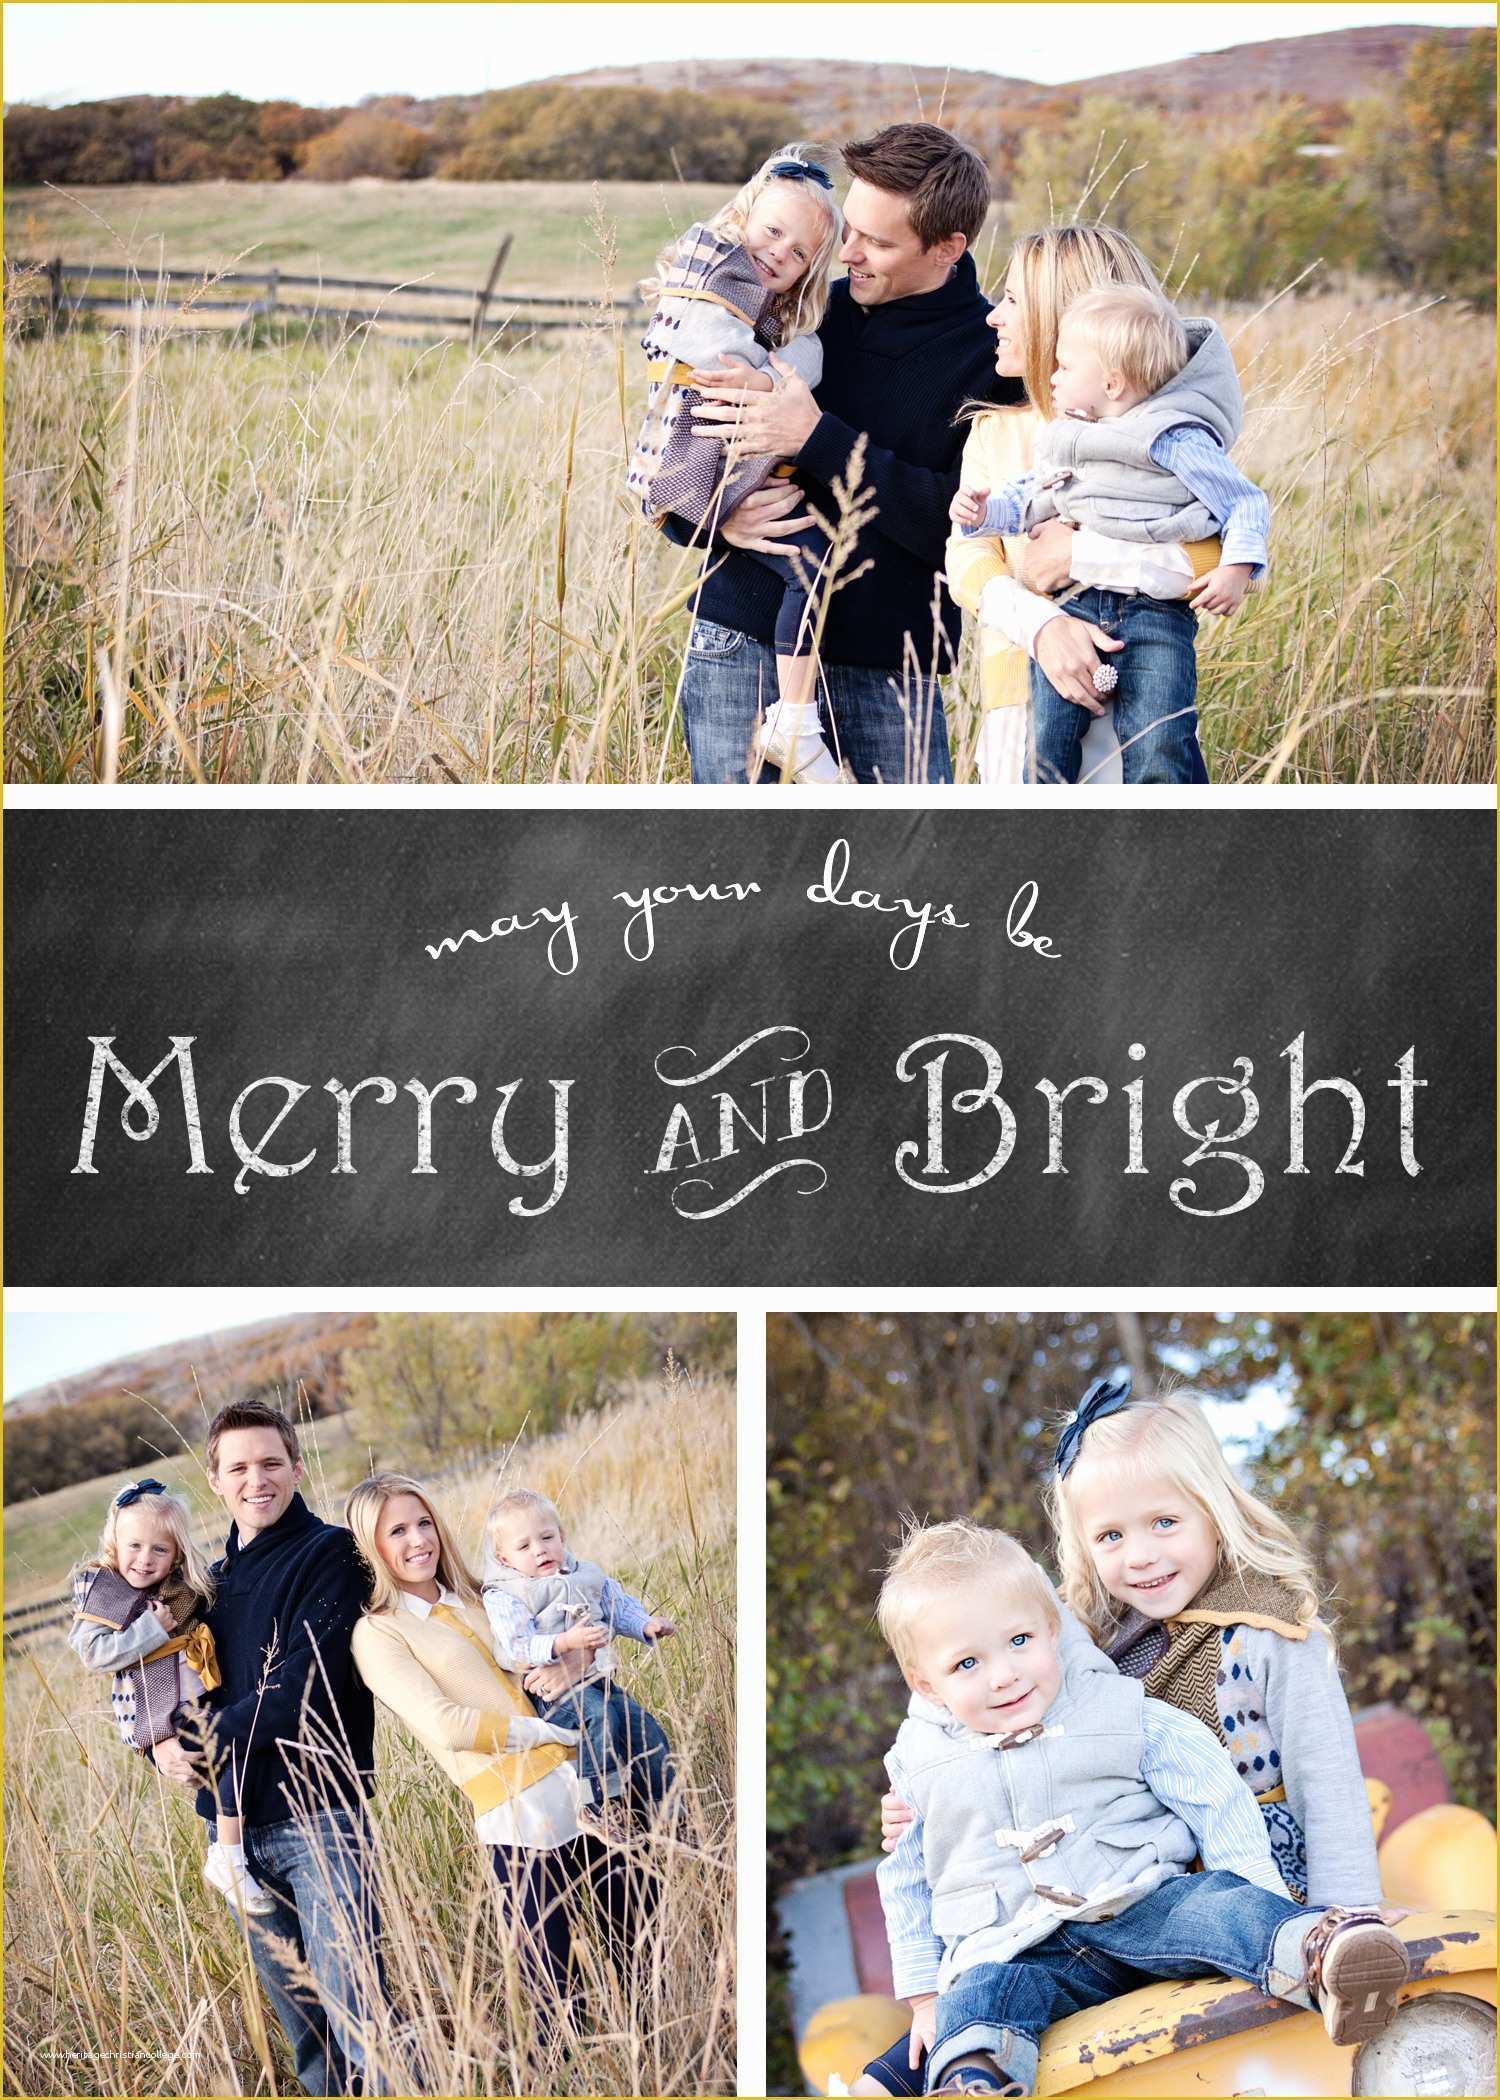 Free Christmas Card Templates for Photographers Of Free Chalkboard Christmas Card Templates Chelsea